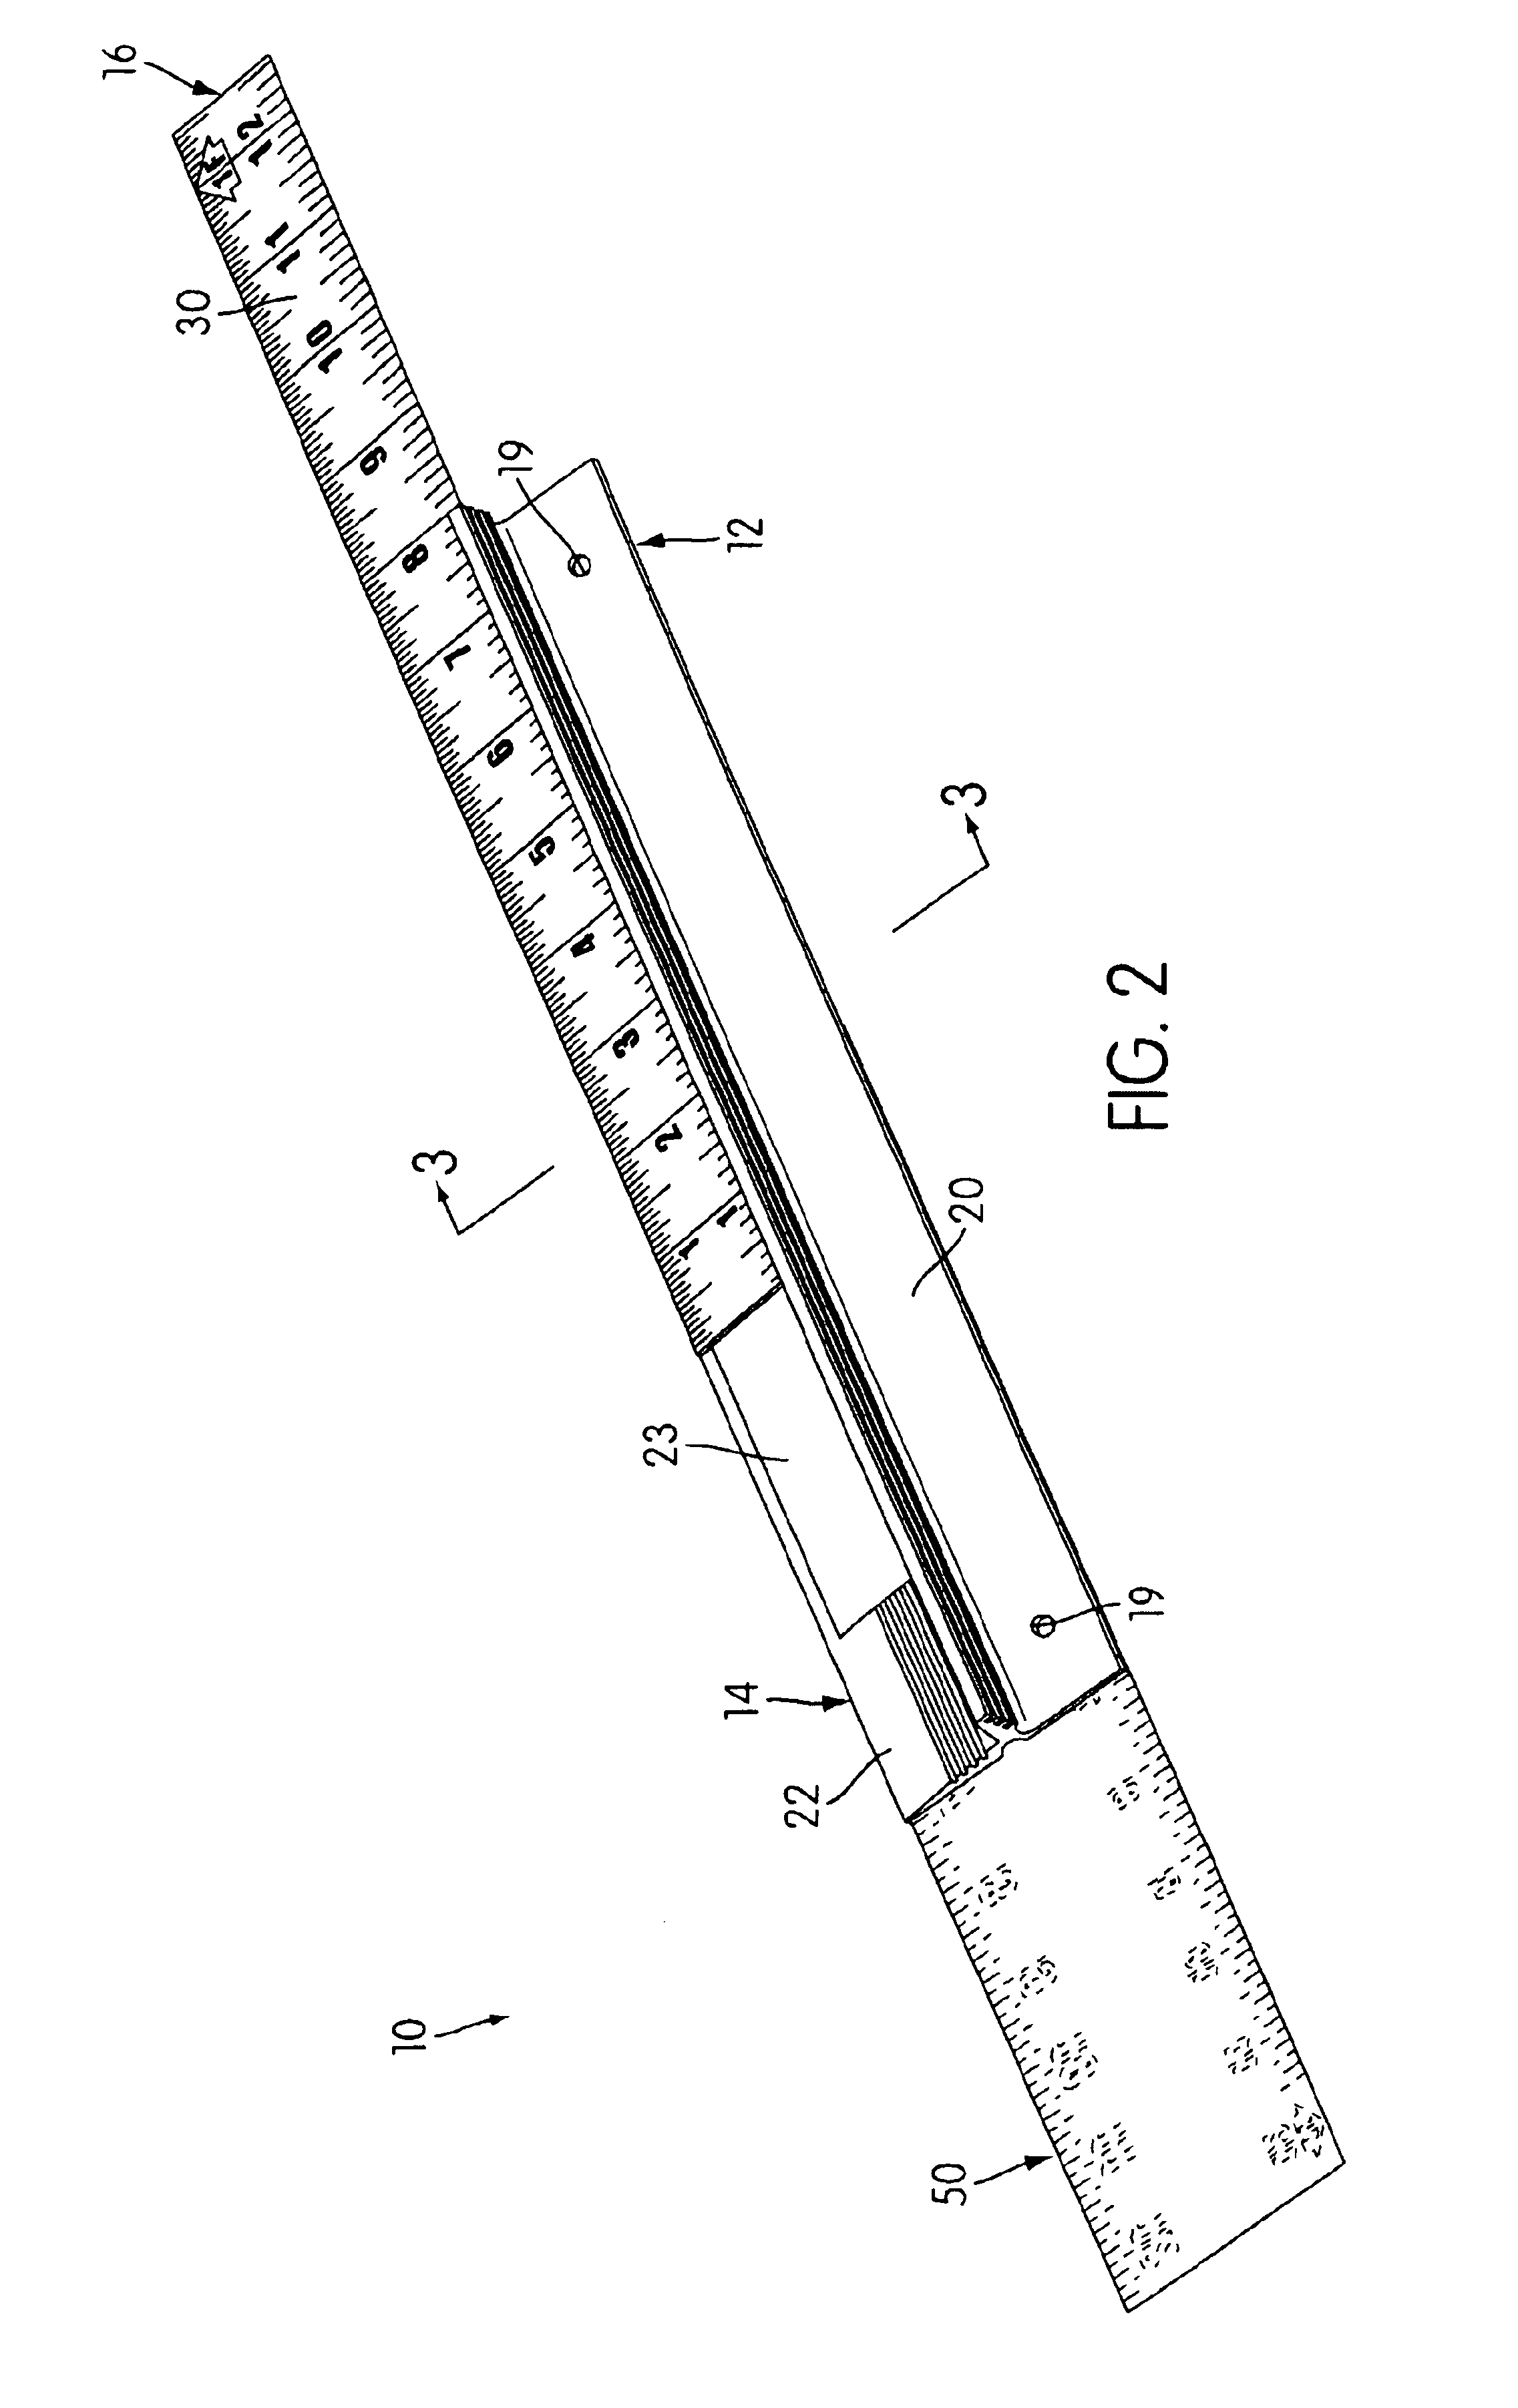 Straight edge to facilitate holding and measuring and to provide protection when cutting